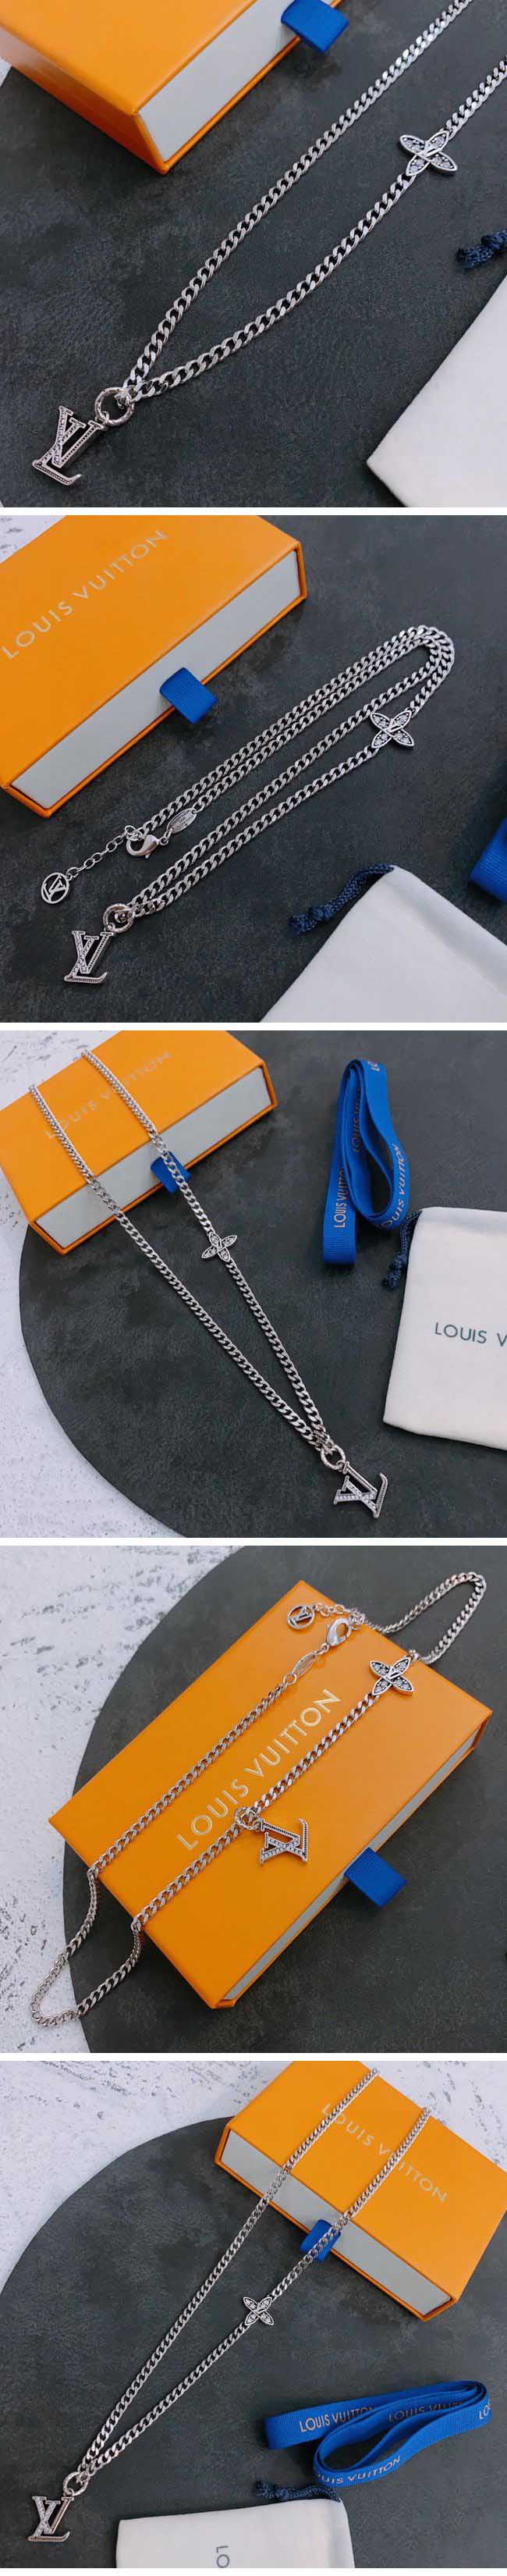 Louis Vuitton Silver LV Charm Necklace ルイヴィトン シルバー LV チャーム ネックレス